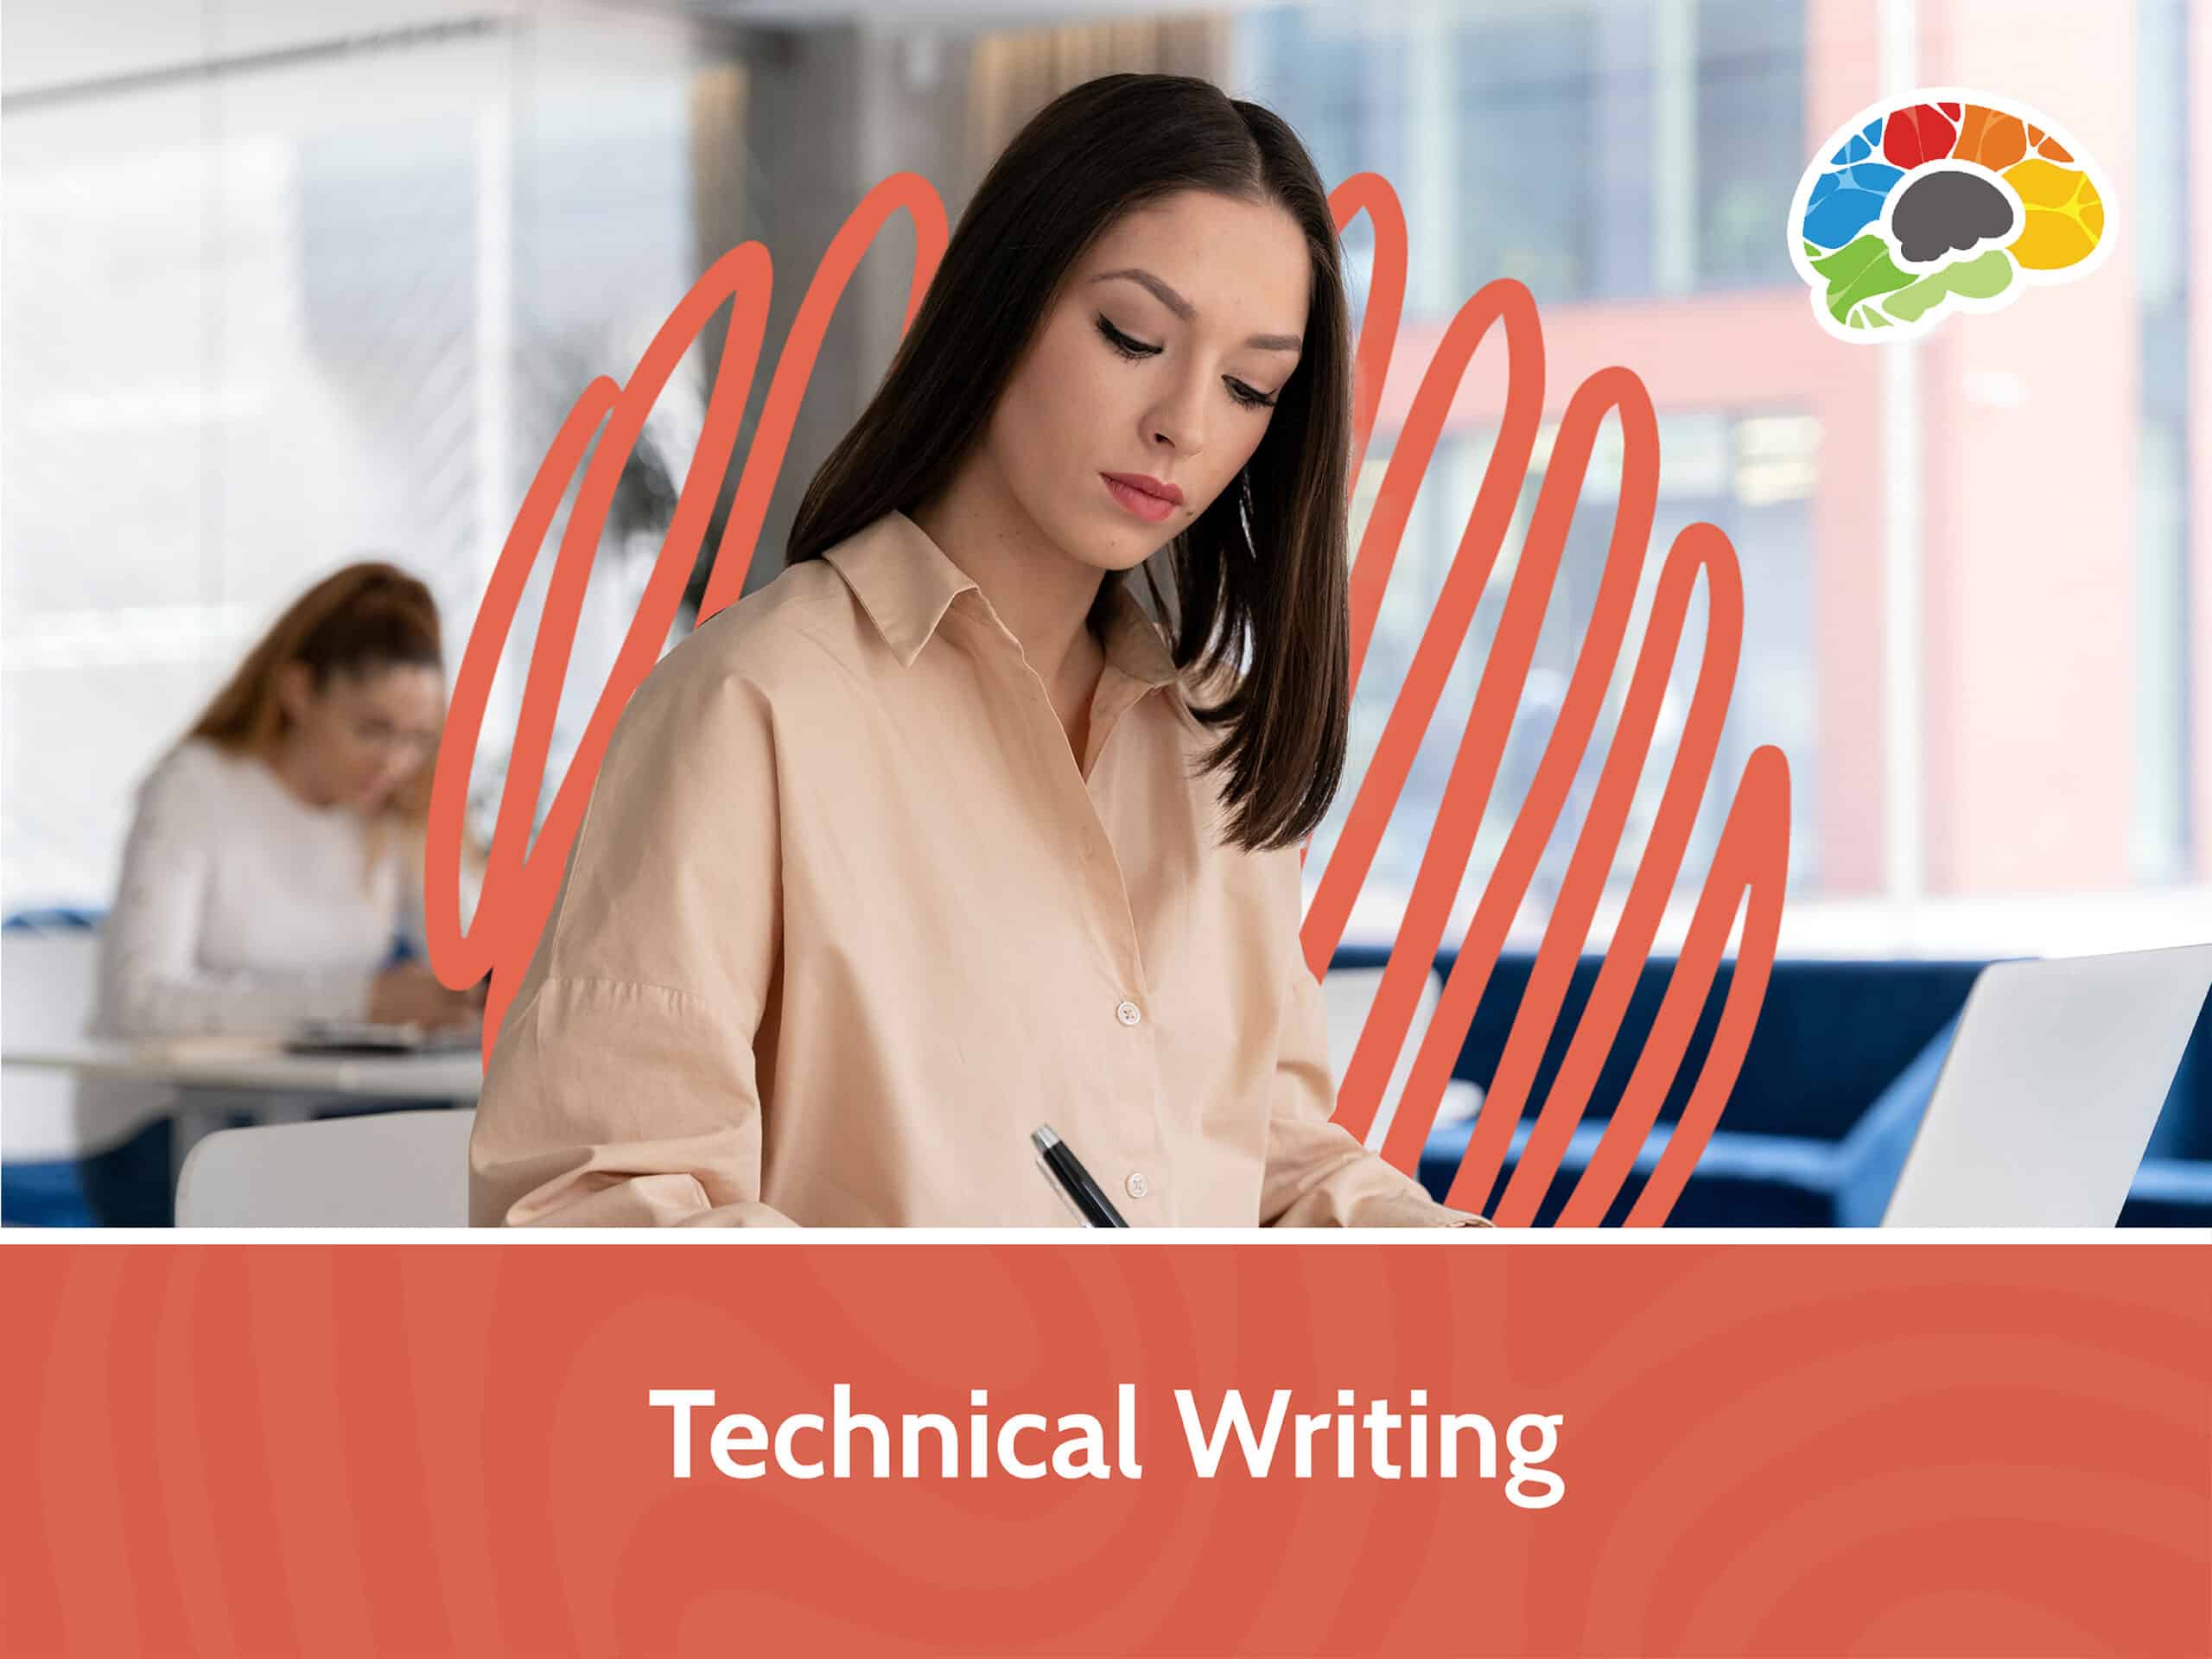 Technical Writing scaled